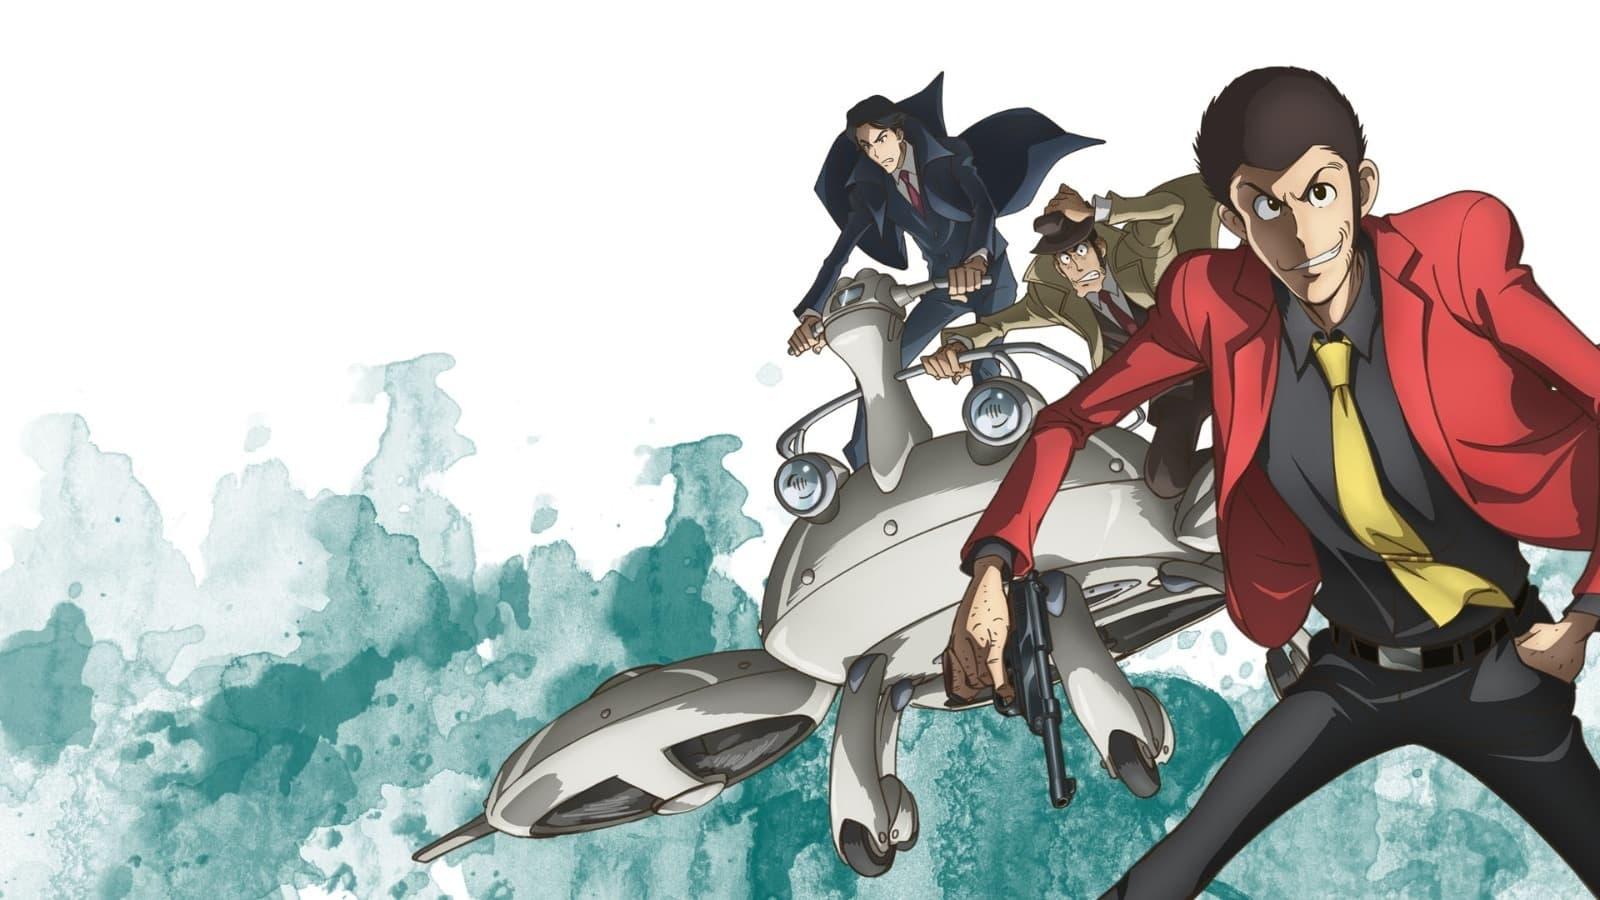 Lupin the Third: Prison of the Past backdrop